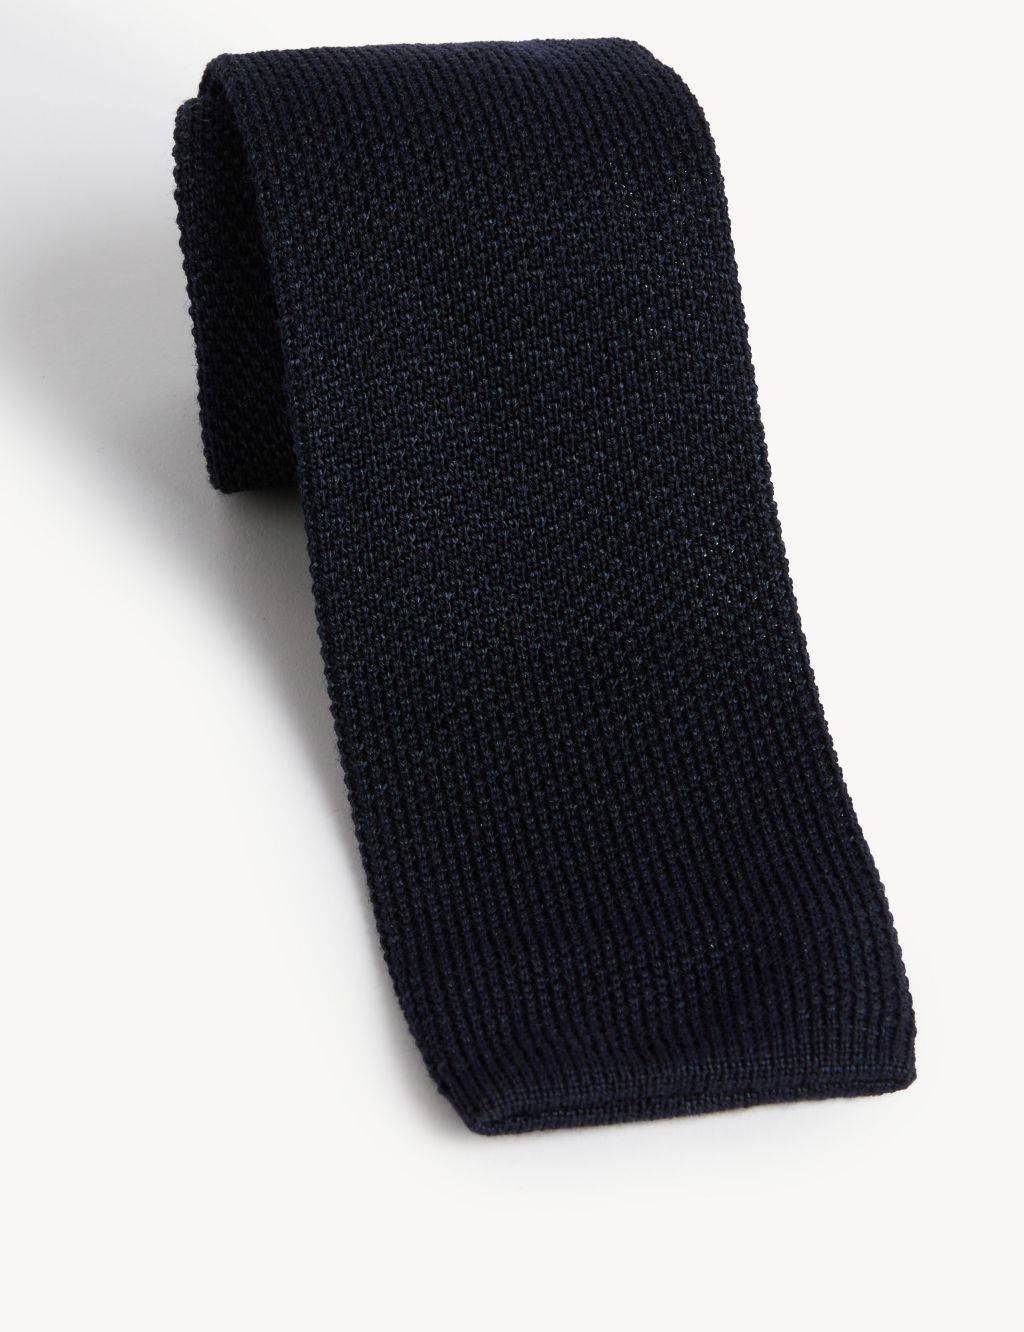 Italian Silk and Wool Knitted Tie image 1